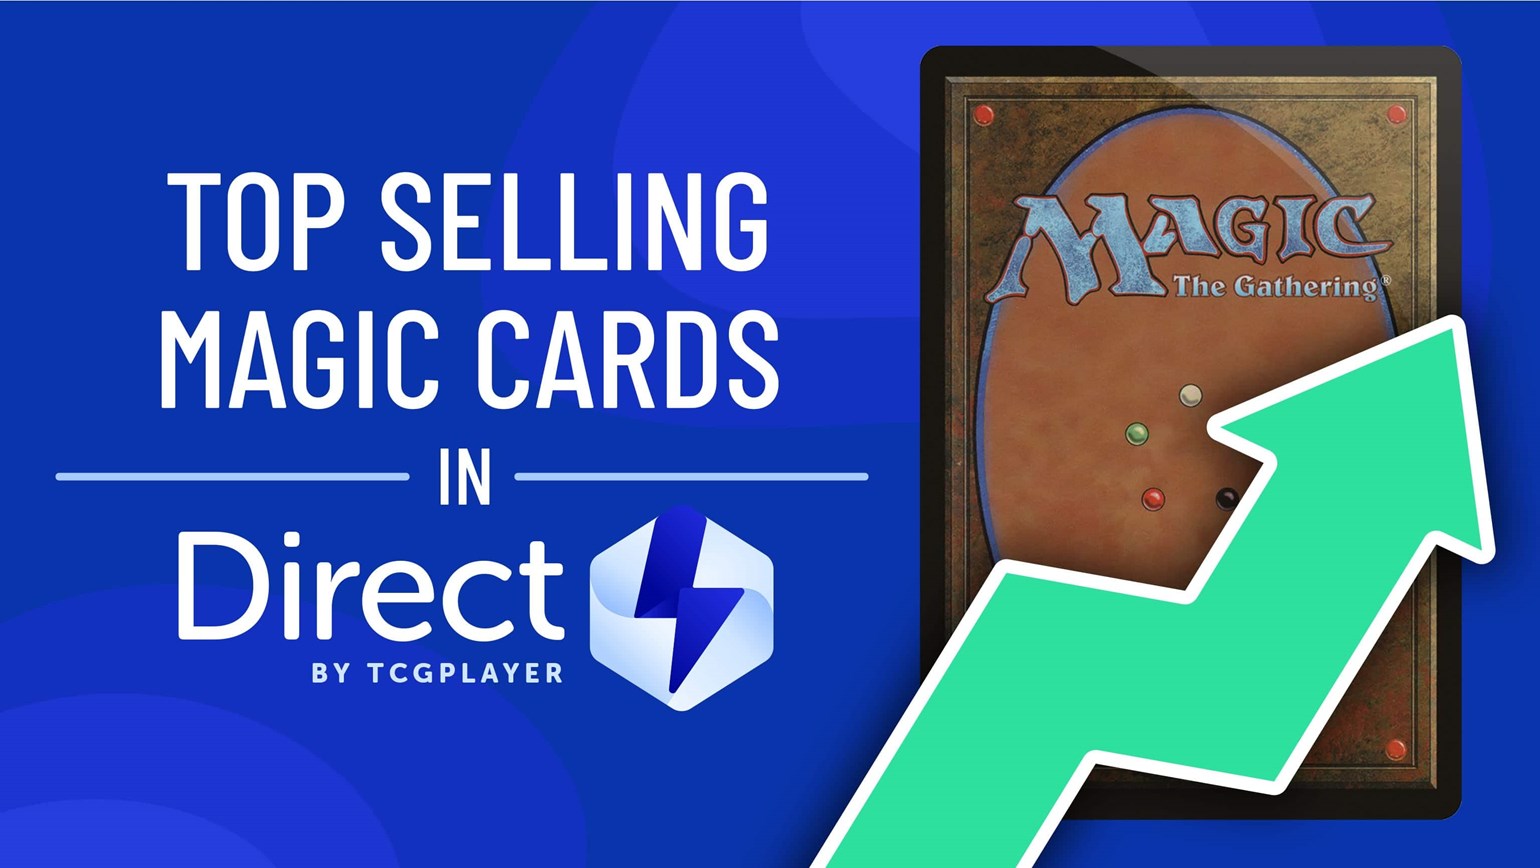 August Top Selling Magic: The Gathering Cards in Direct by TCGplayer